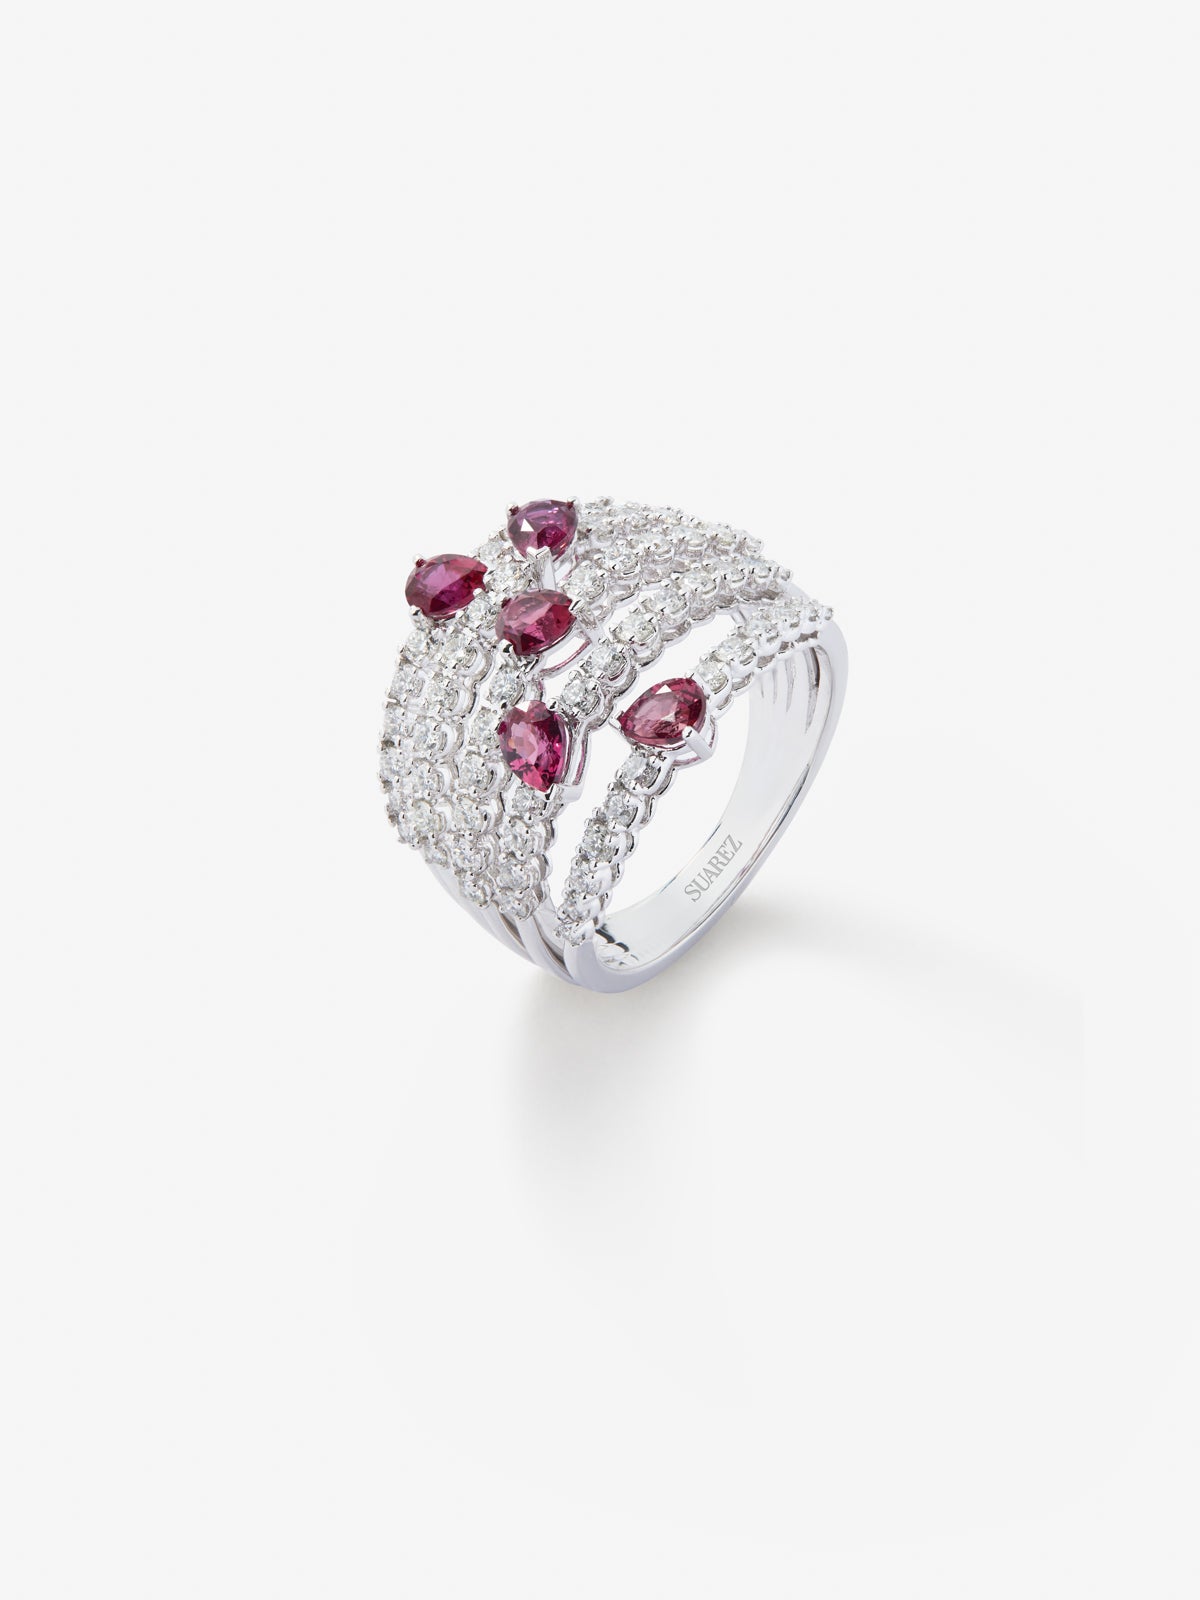 18K white gold ring with 60 brilliant-cut diamonds with a total of 1 cts and 5 pear-cut red rubies with a total of 1.14 cts